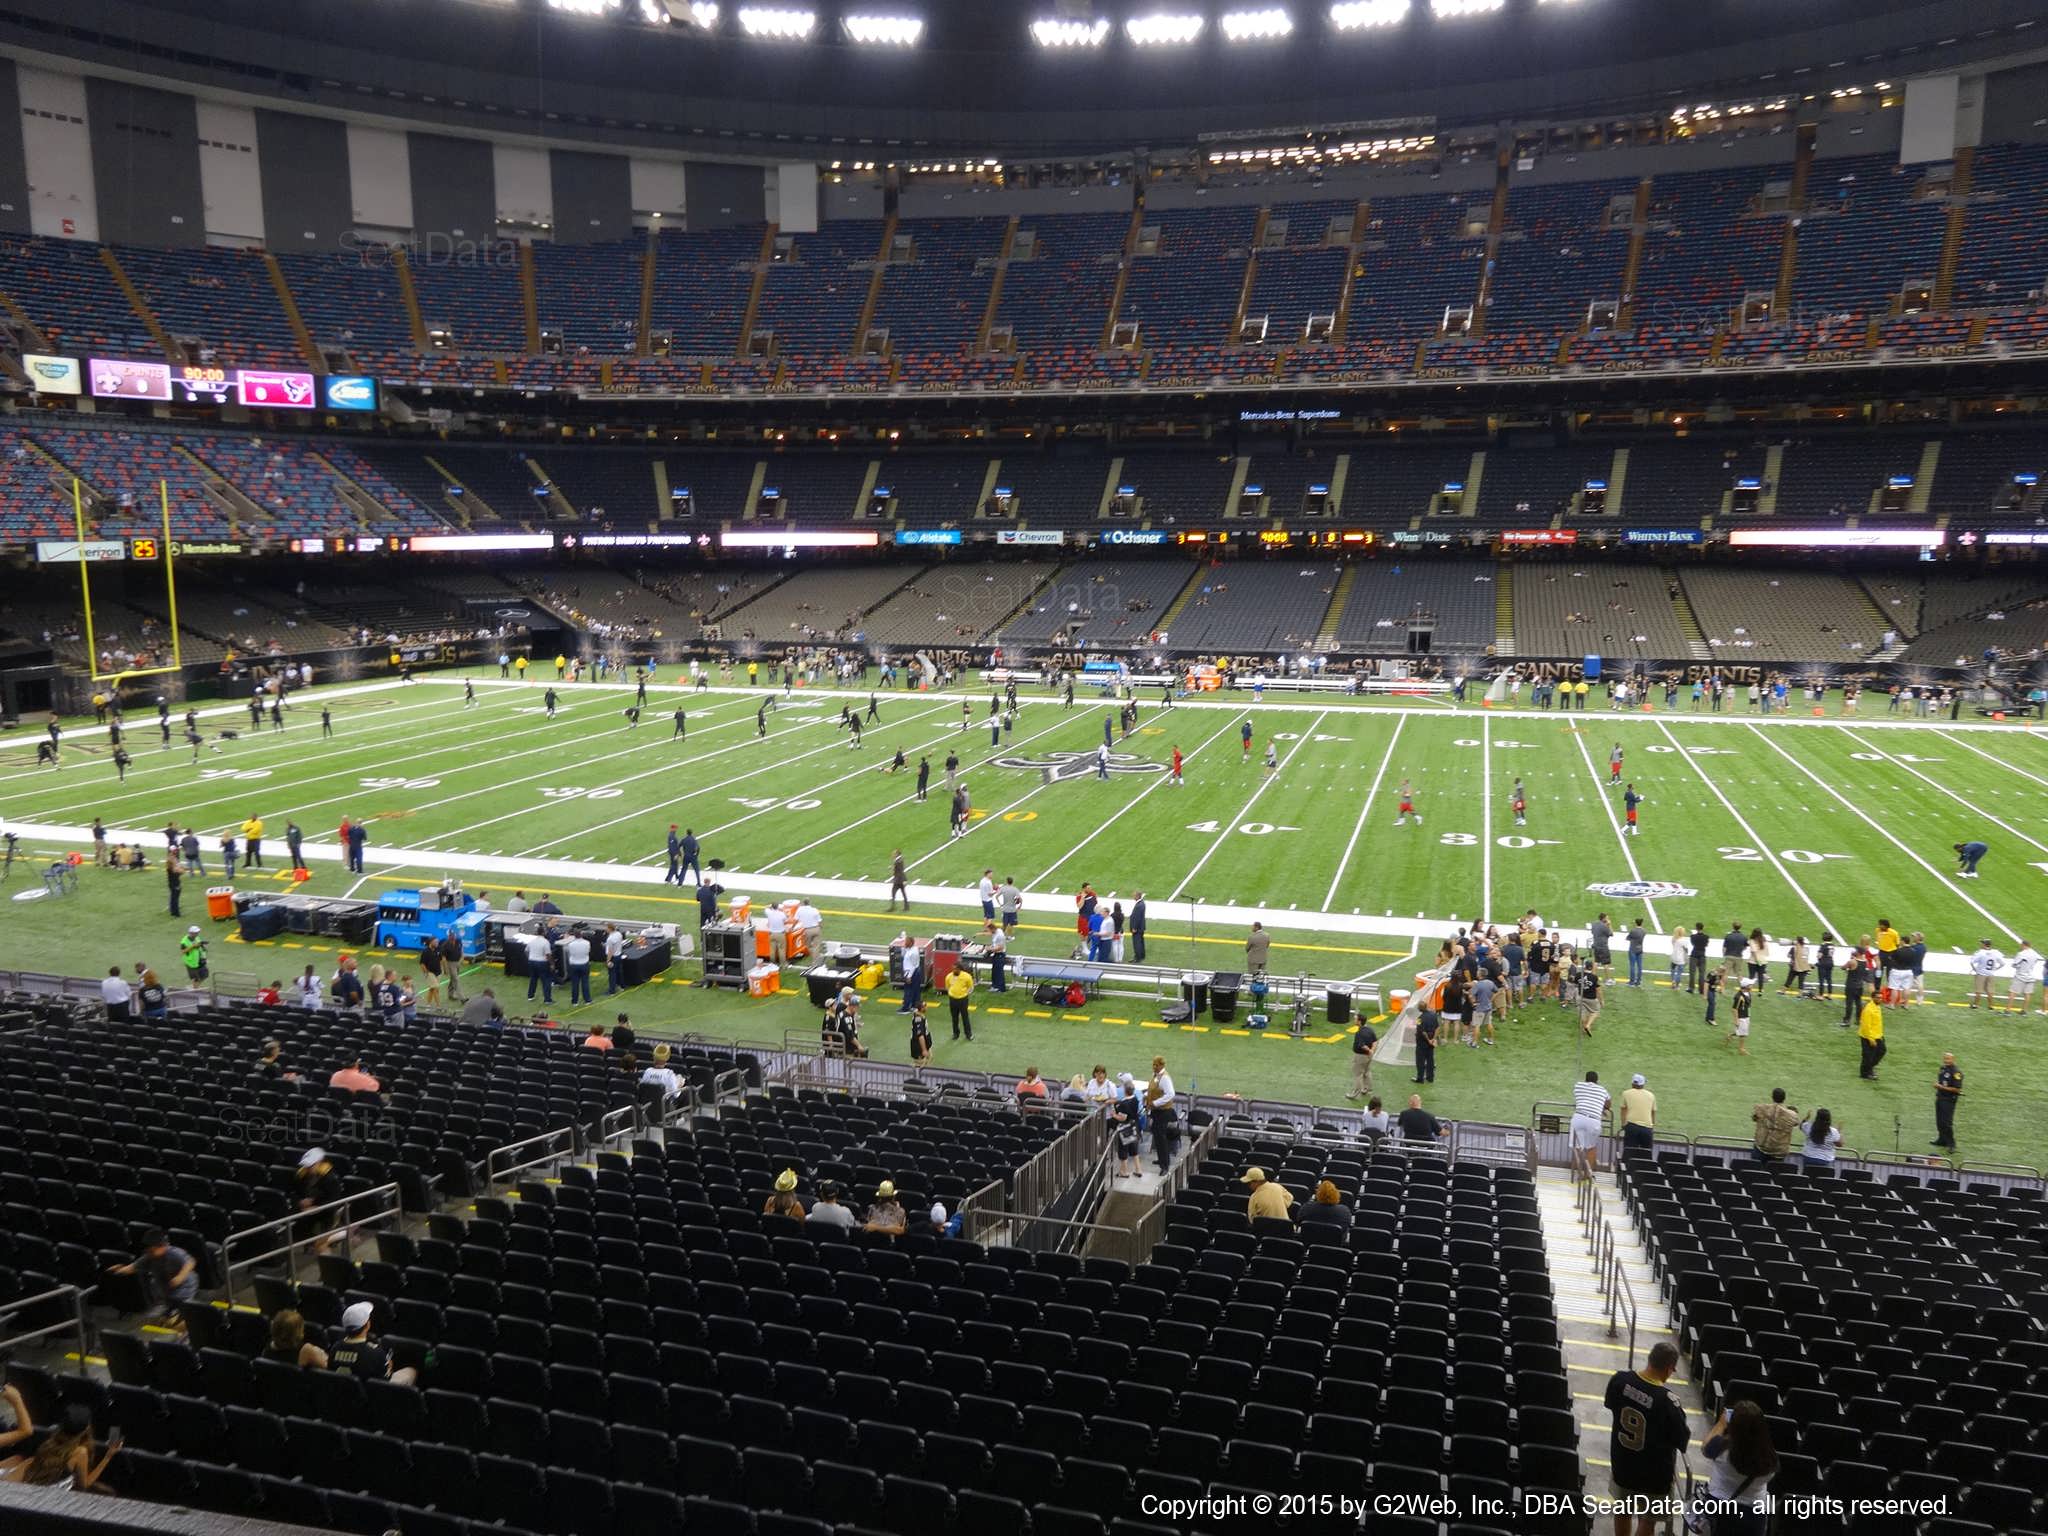 Seat view from section 219 at the Mercedes-Benz Superdome, home of the New Orleans Saints